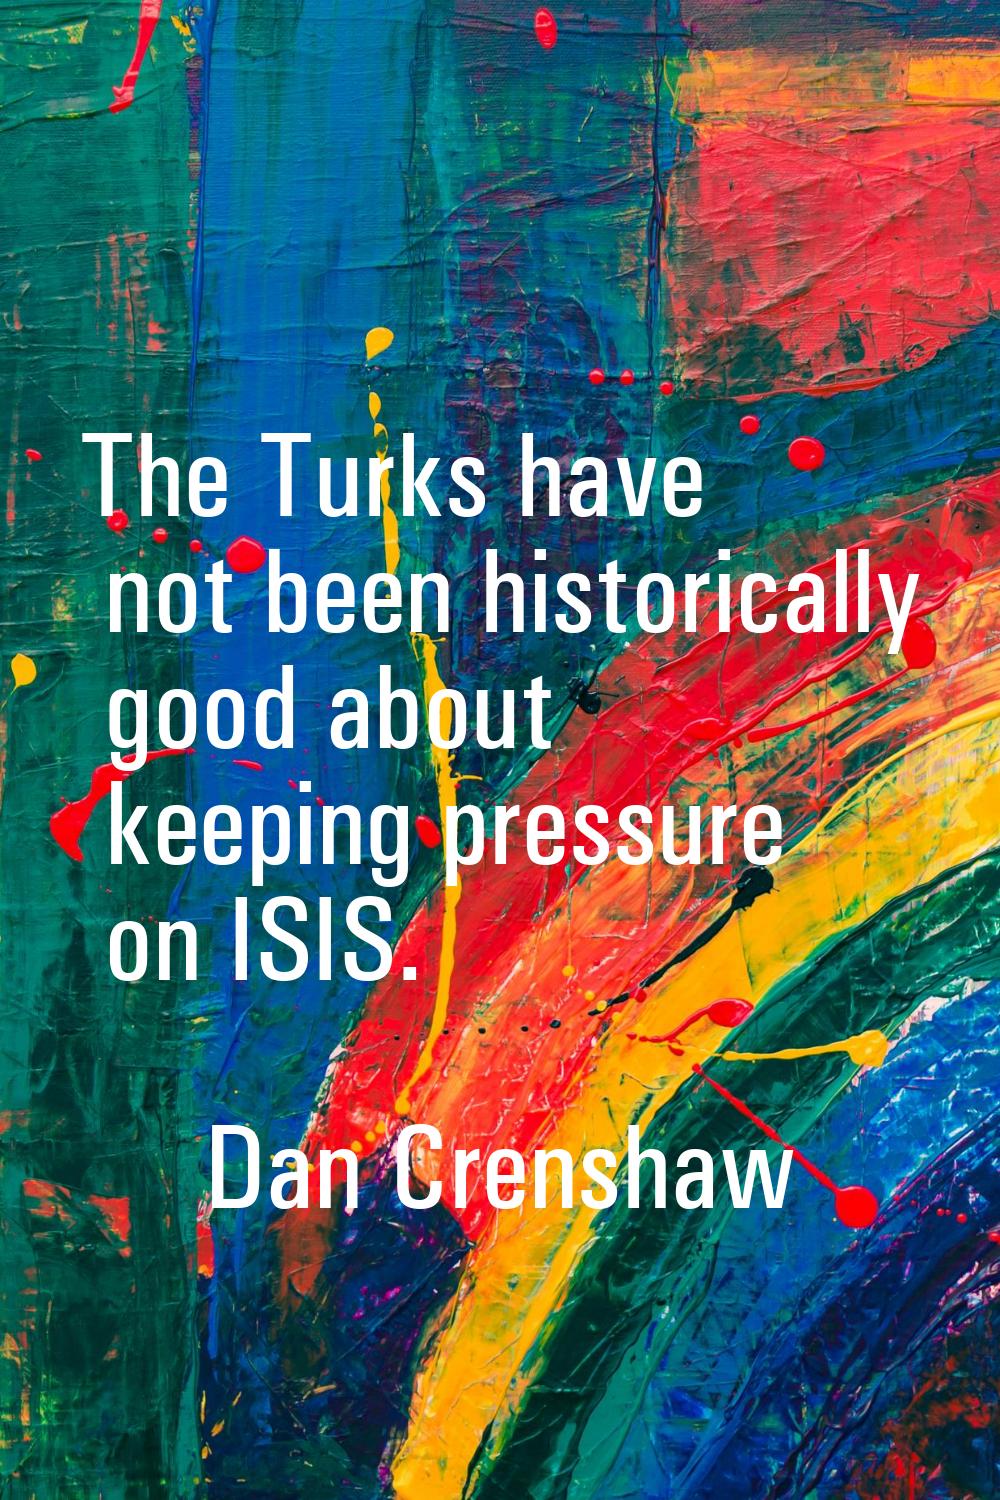 The Turks have not been historically good about keeping pressure on ISIS.